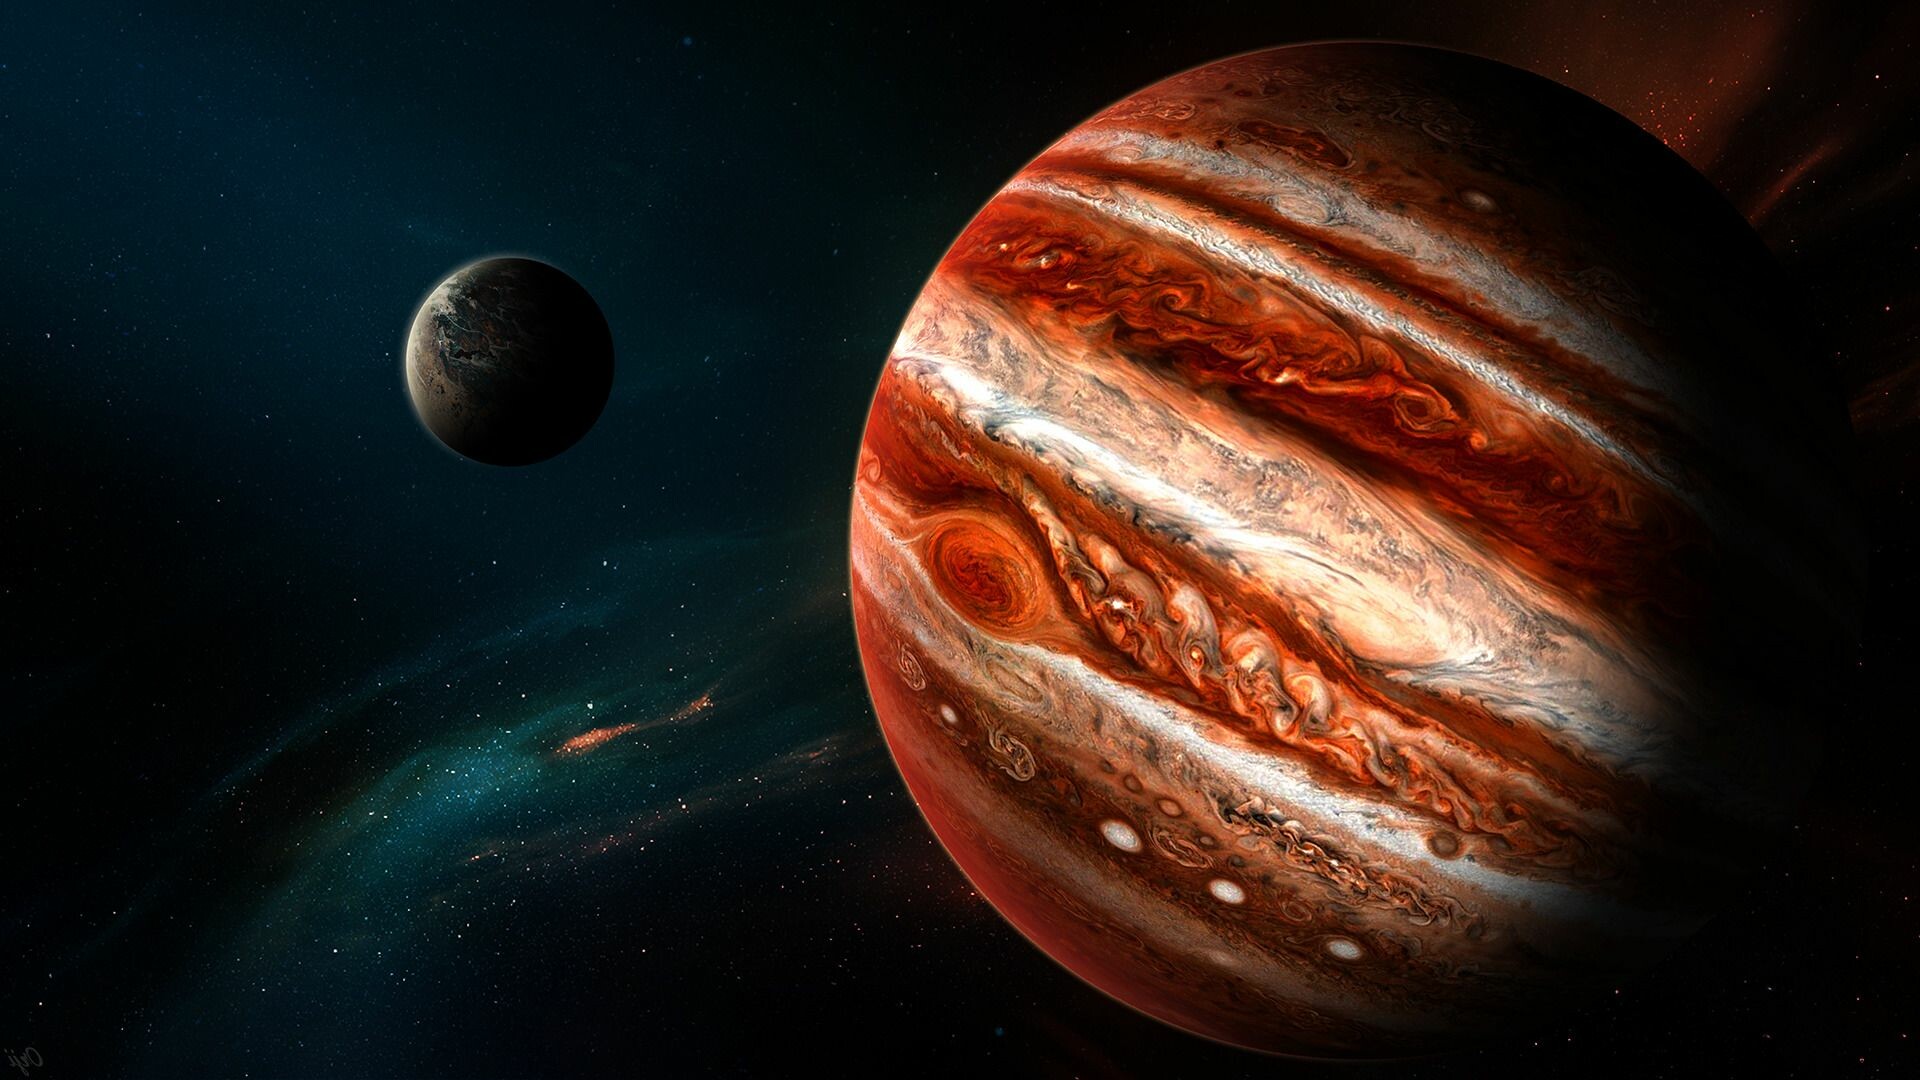 Jupiter 4K Wallpaper: HD, 4K, 5K for PC and Mobile. Download free image for iPhone, Android